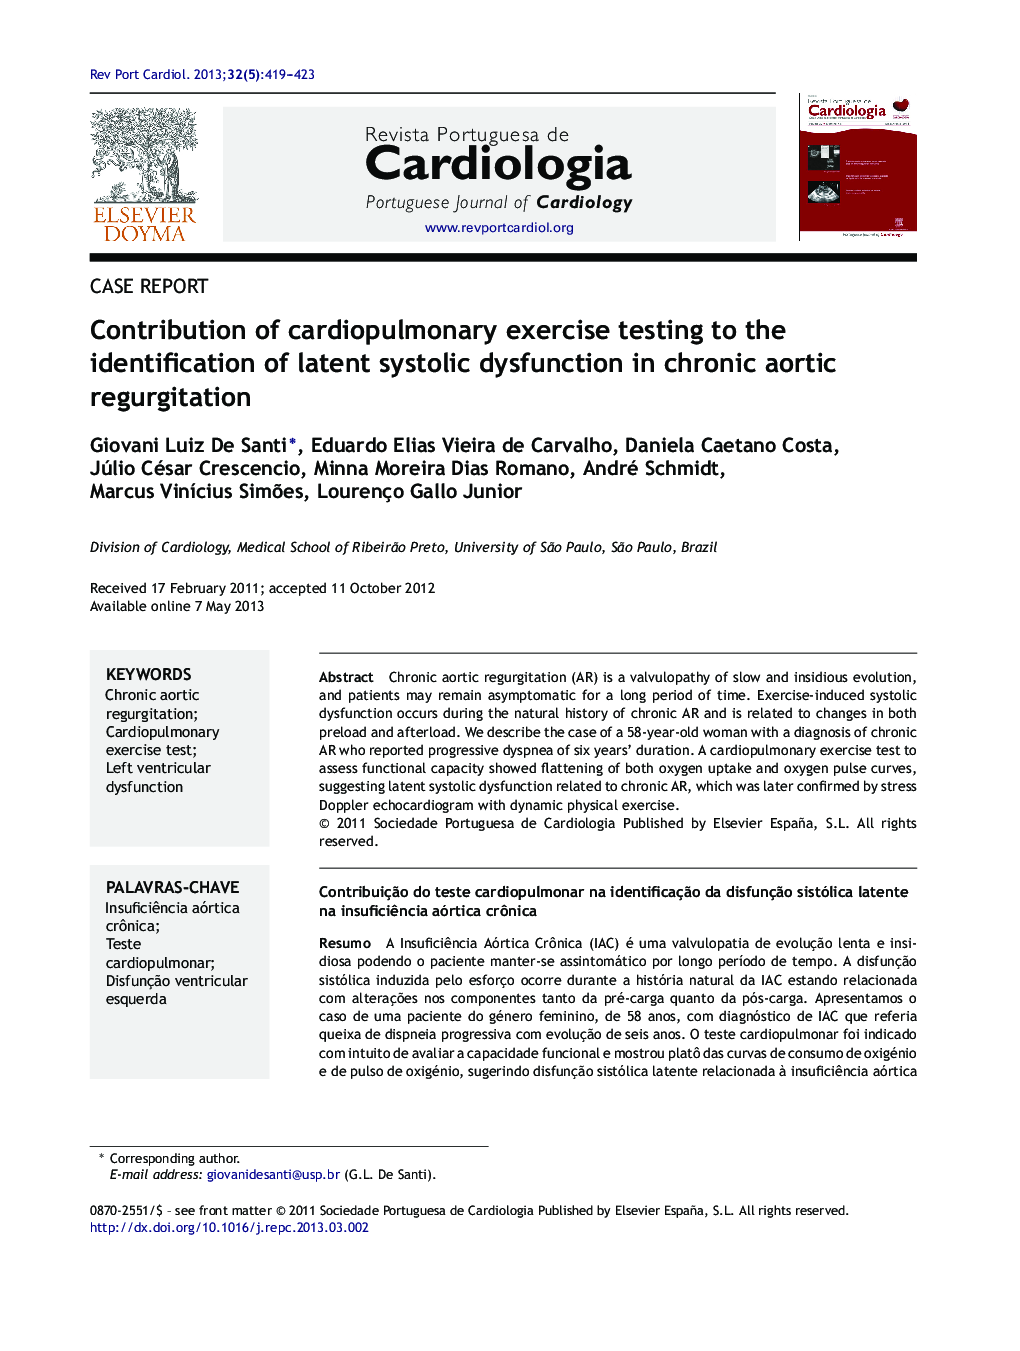 Contribution of cardiopulmonary exercise testing to the identification of latent systolic dysfunction in chronic aortic regurgitation